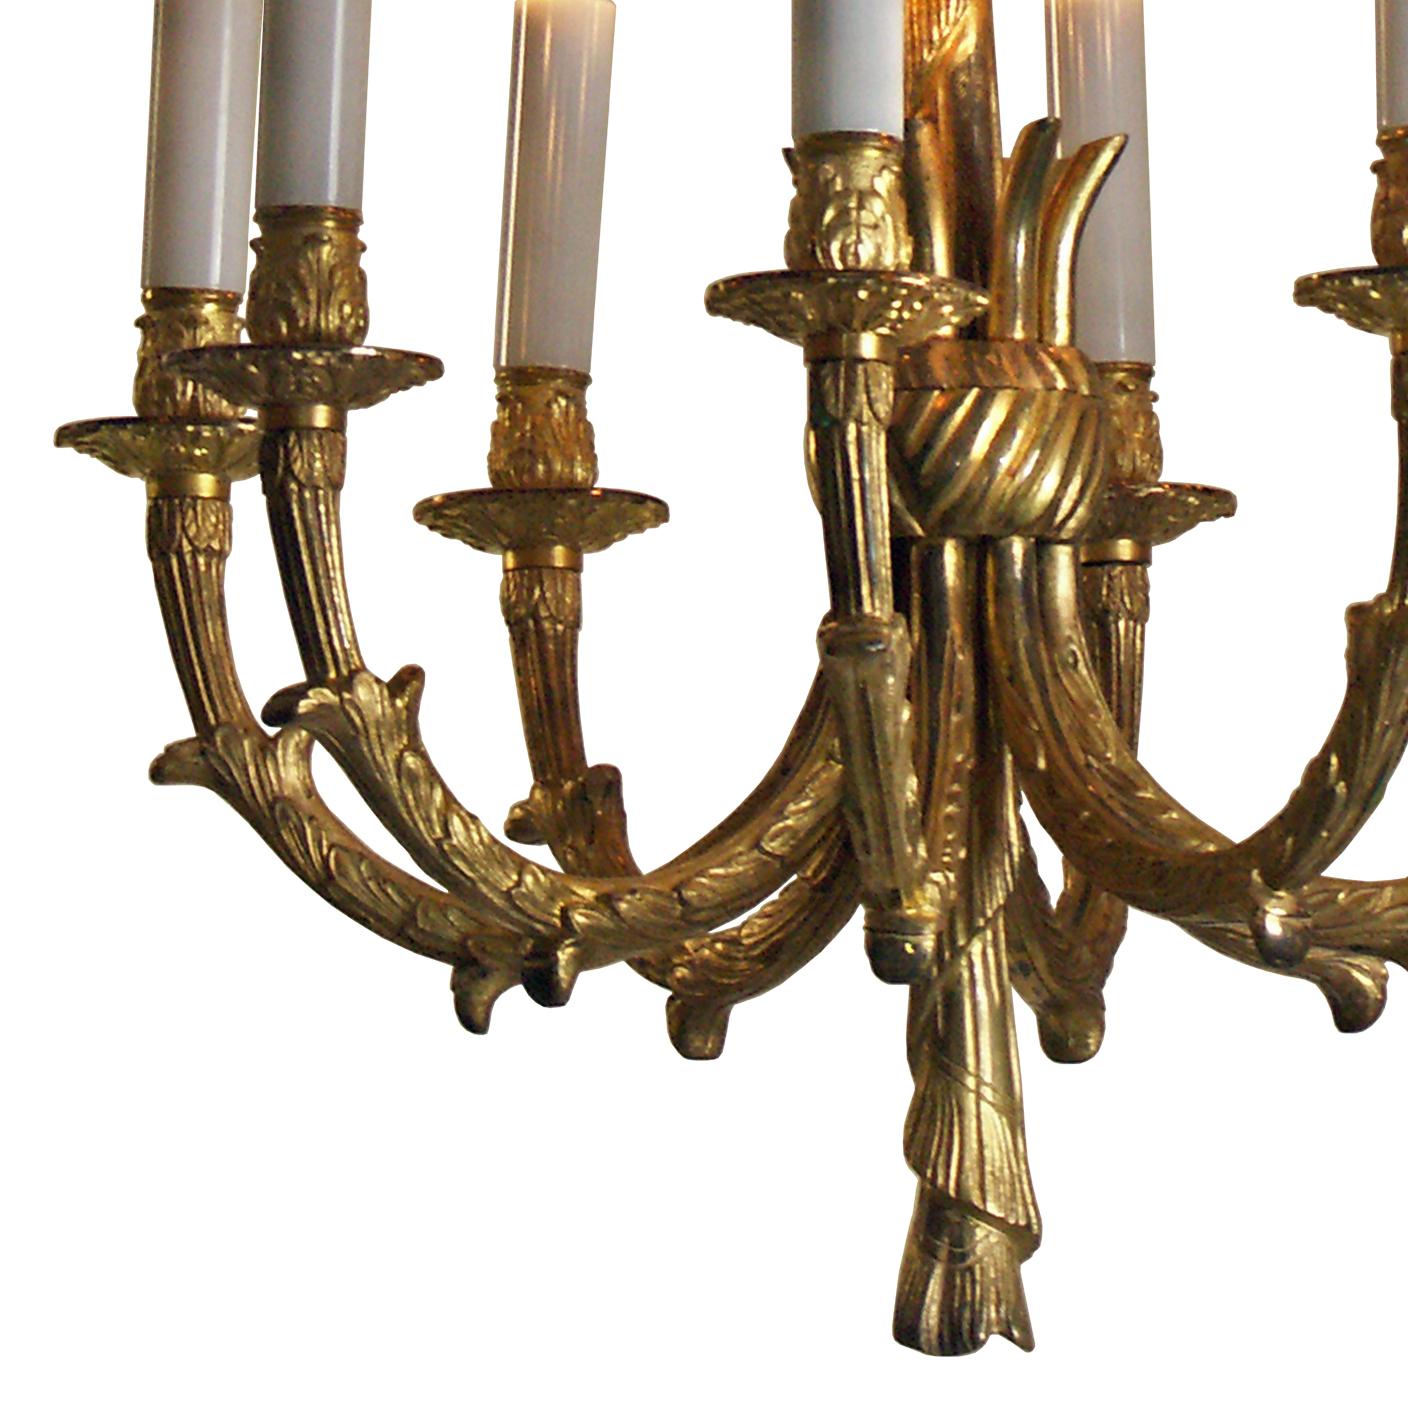 Original Neoclassical Austrian Mastercraft Brass Parlor Chandelier In Good Condition For Sale In Vienna, AT